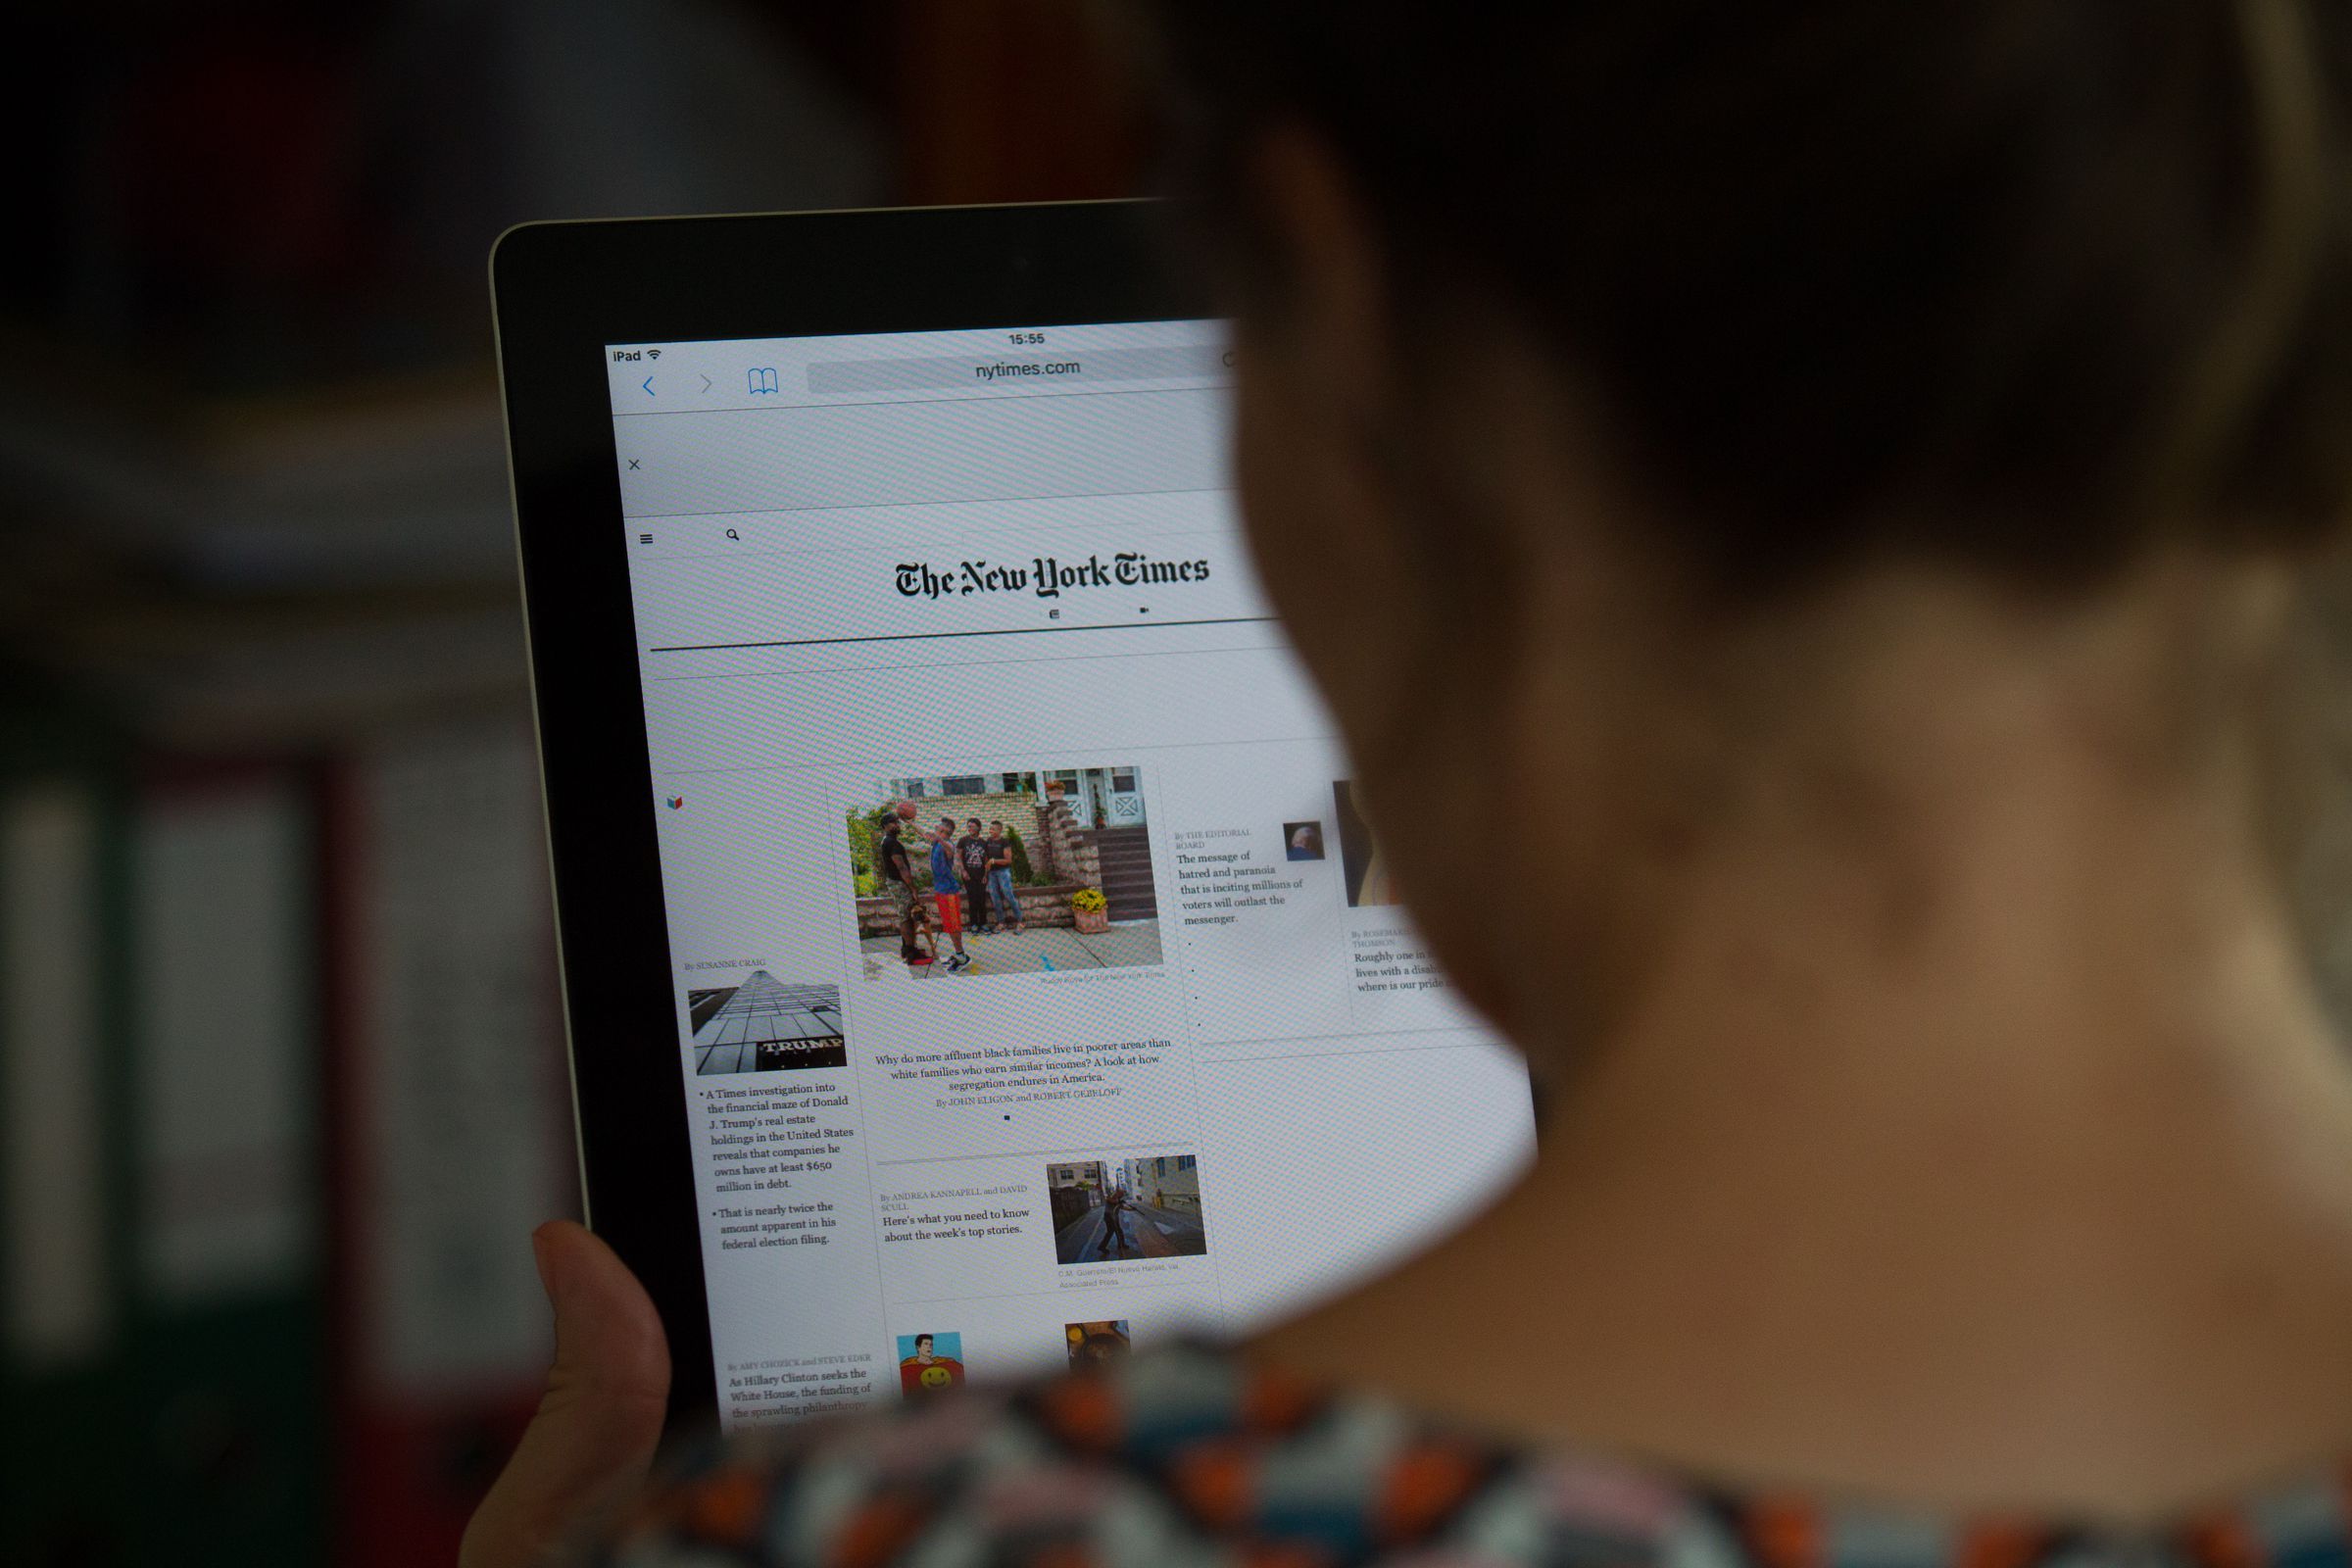 New York Times on a tablet